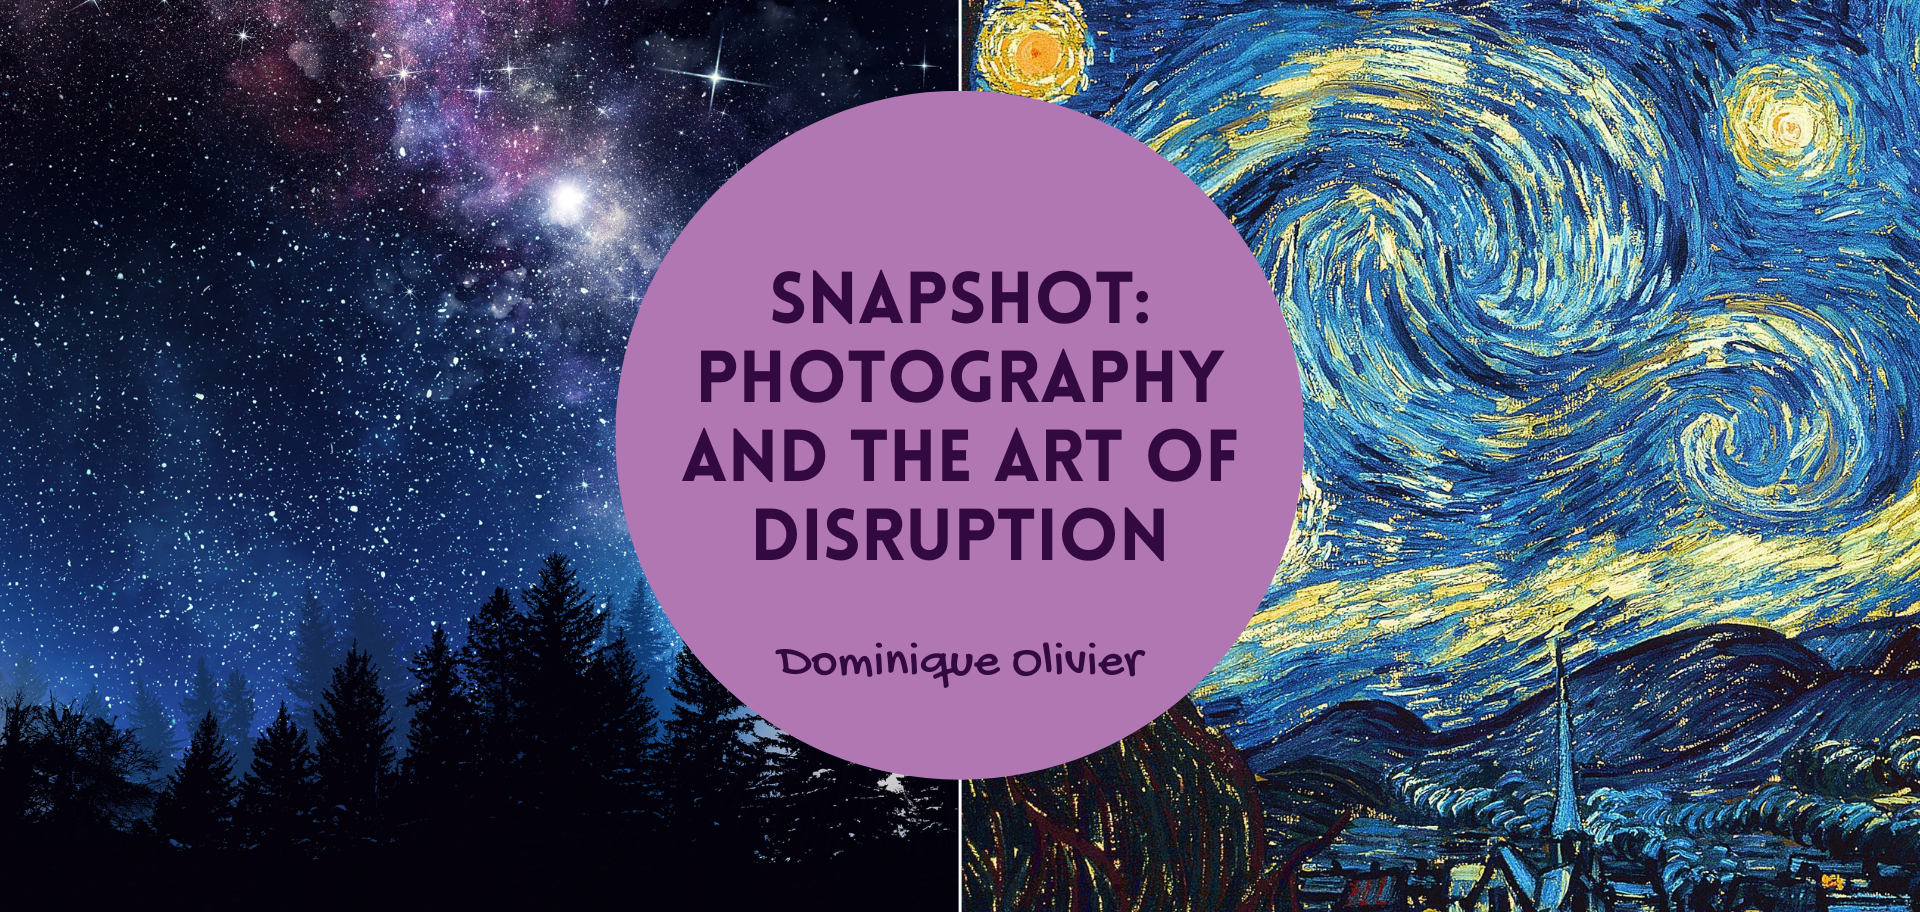 Snapshot: photography and the art of disruption